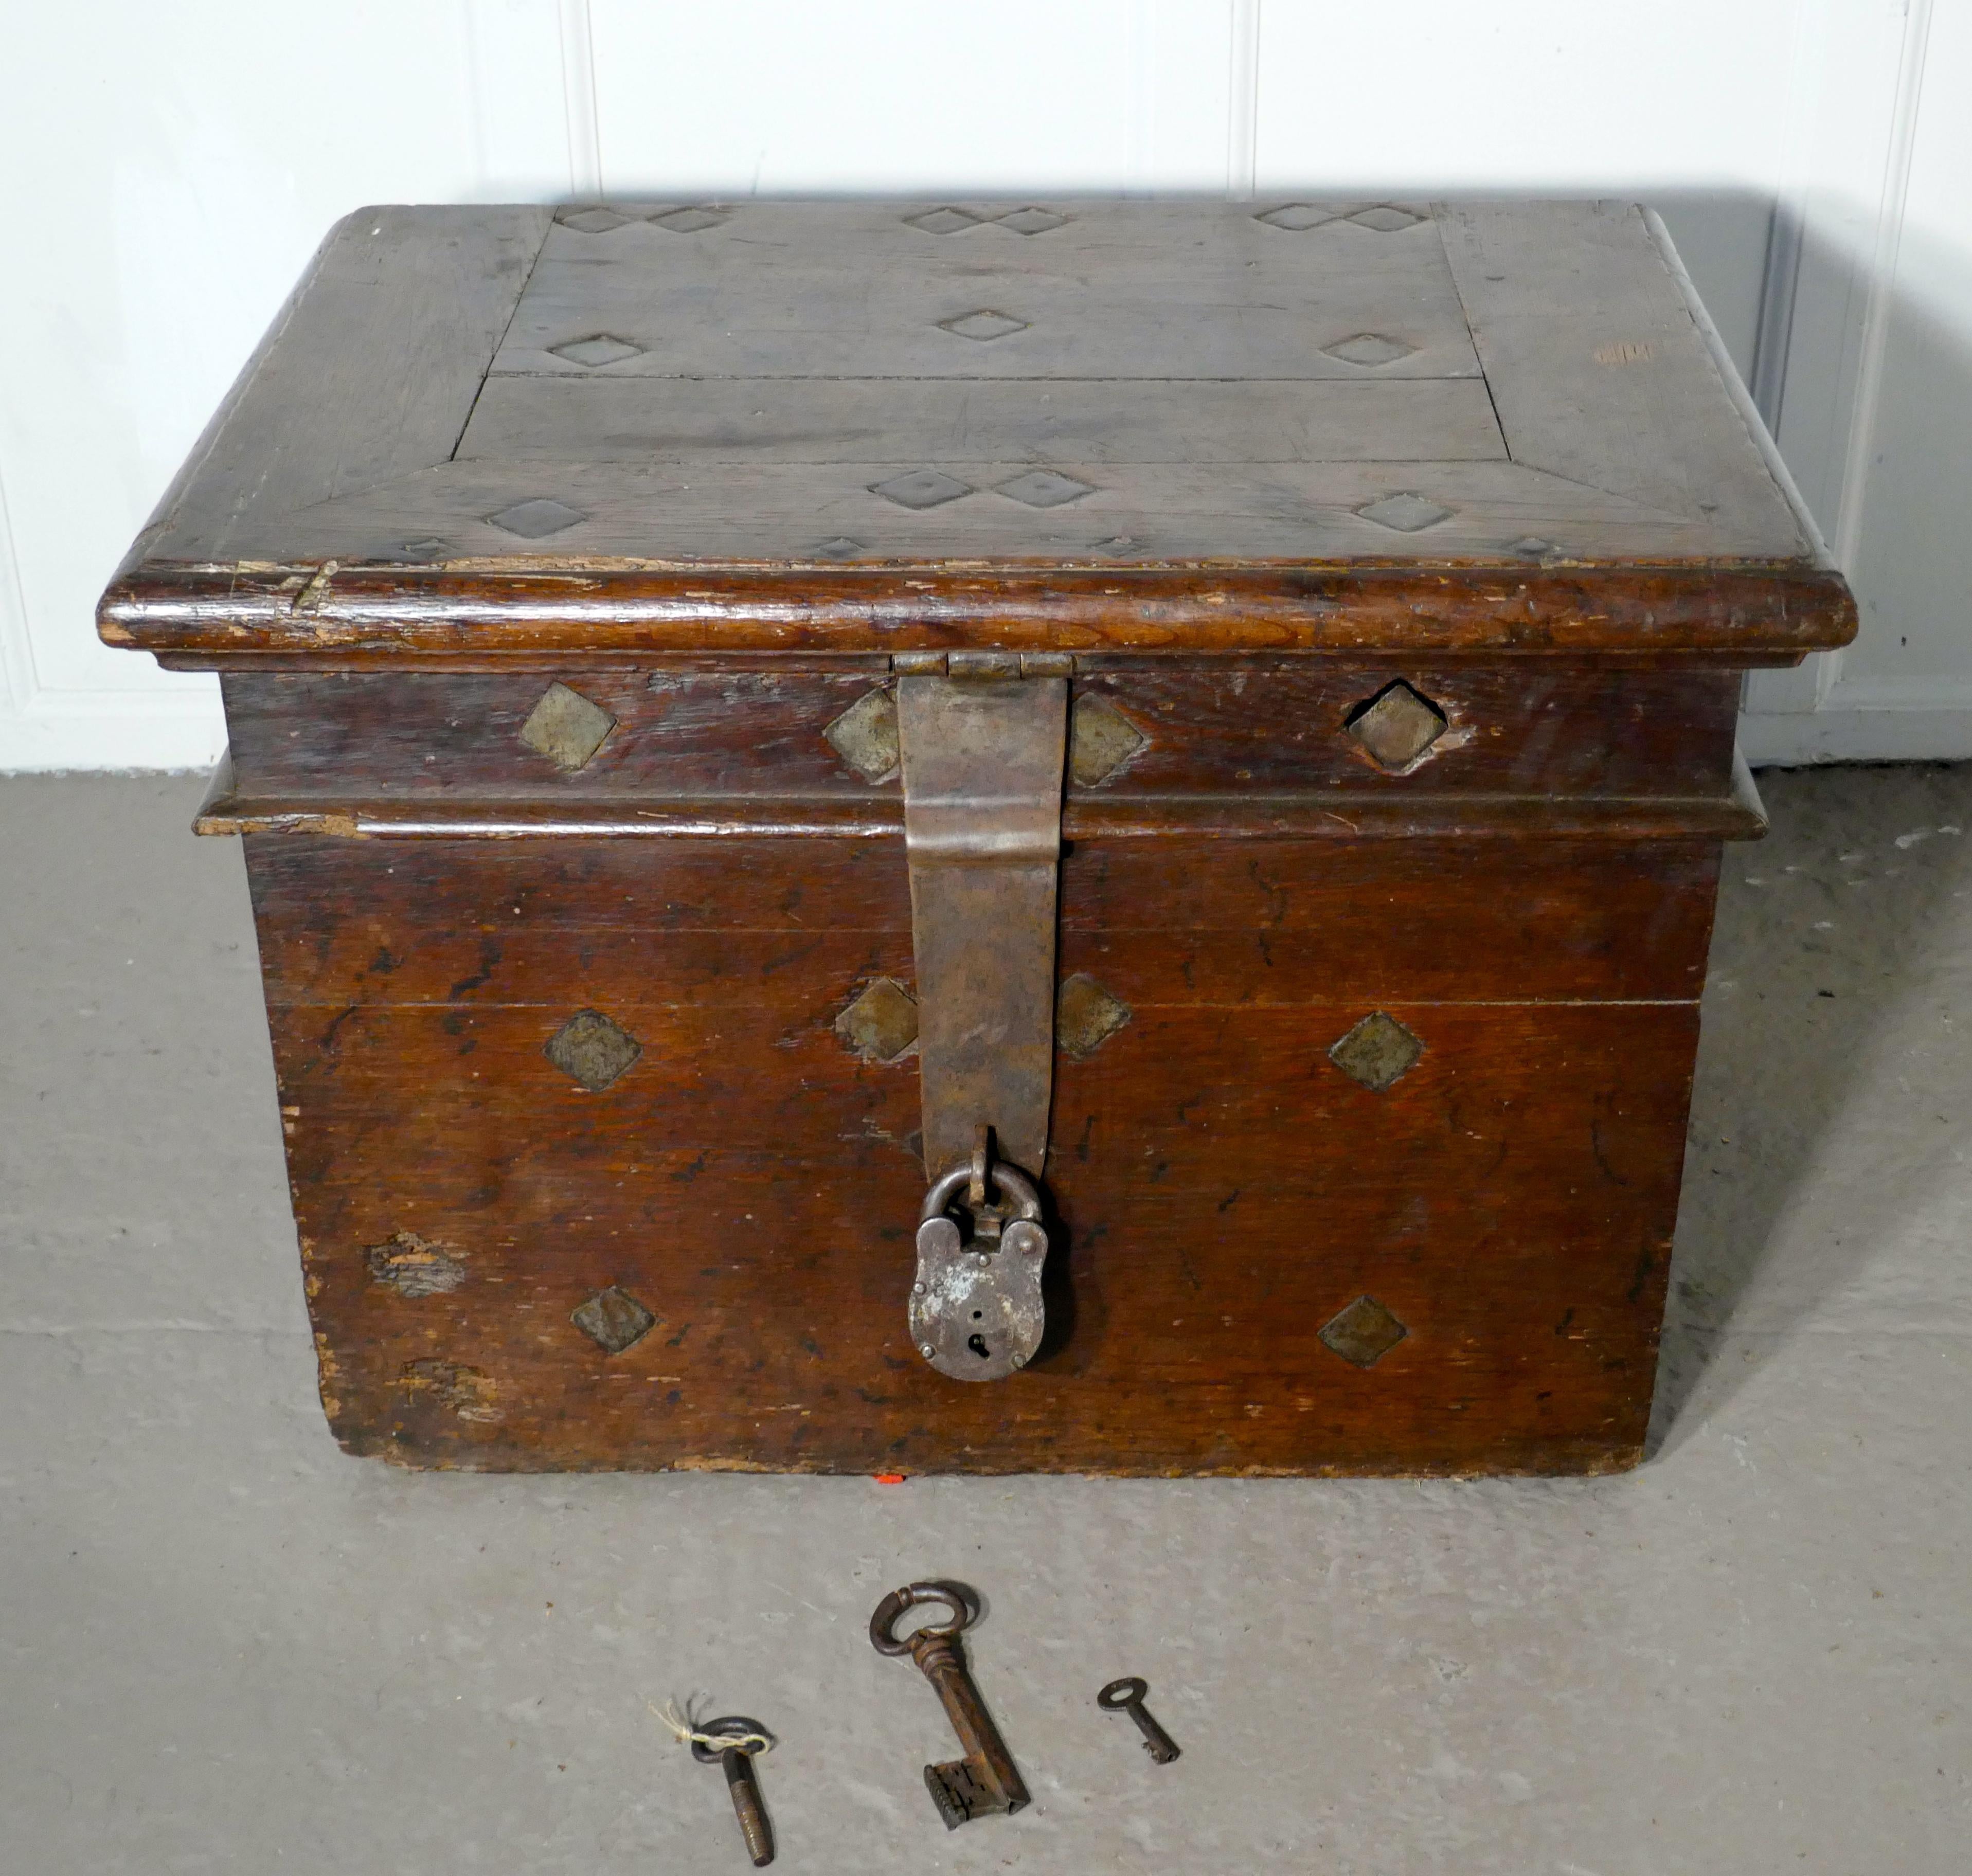 17th Century French Coffer, Oak Silver Treasure Chest, Strong Box

A Very Rare piece, this Oak Coffer was made in the 16th Century in 3” thick Oak, lined inside and strengthened through the wood with 1” square Iron Rods.
Needless to say the chest is